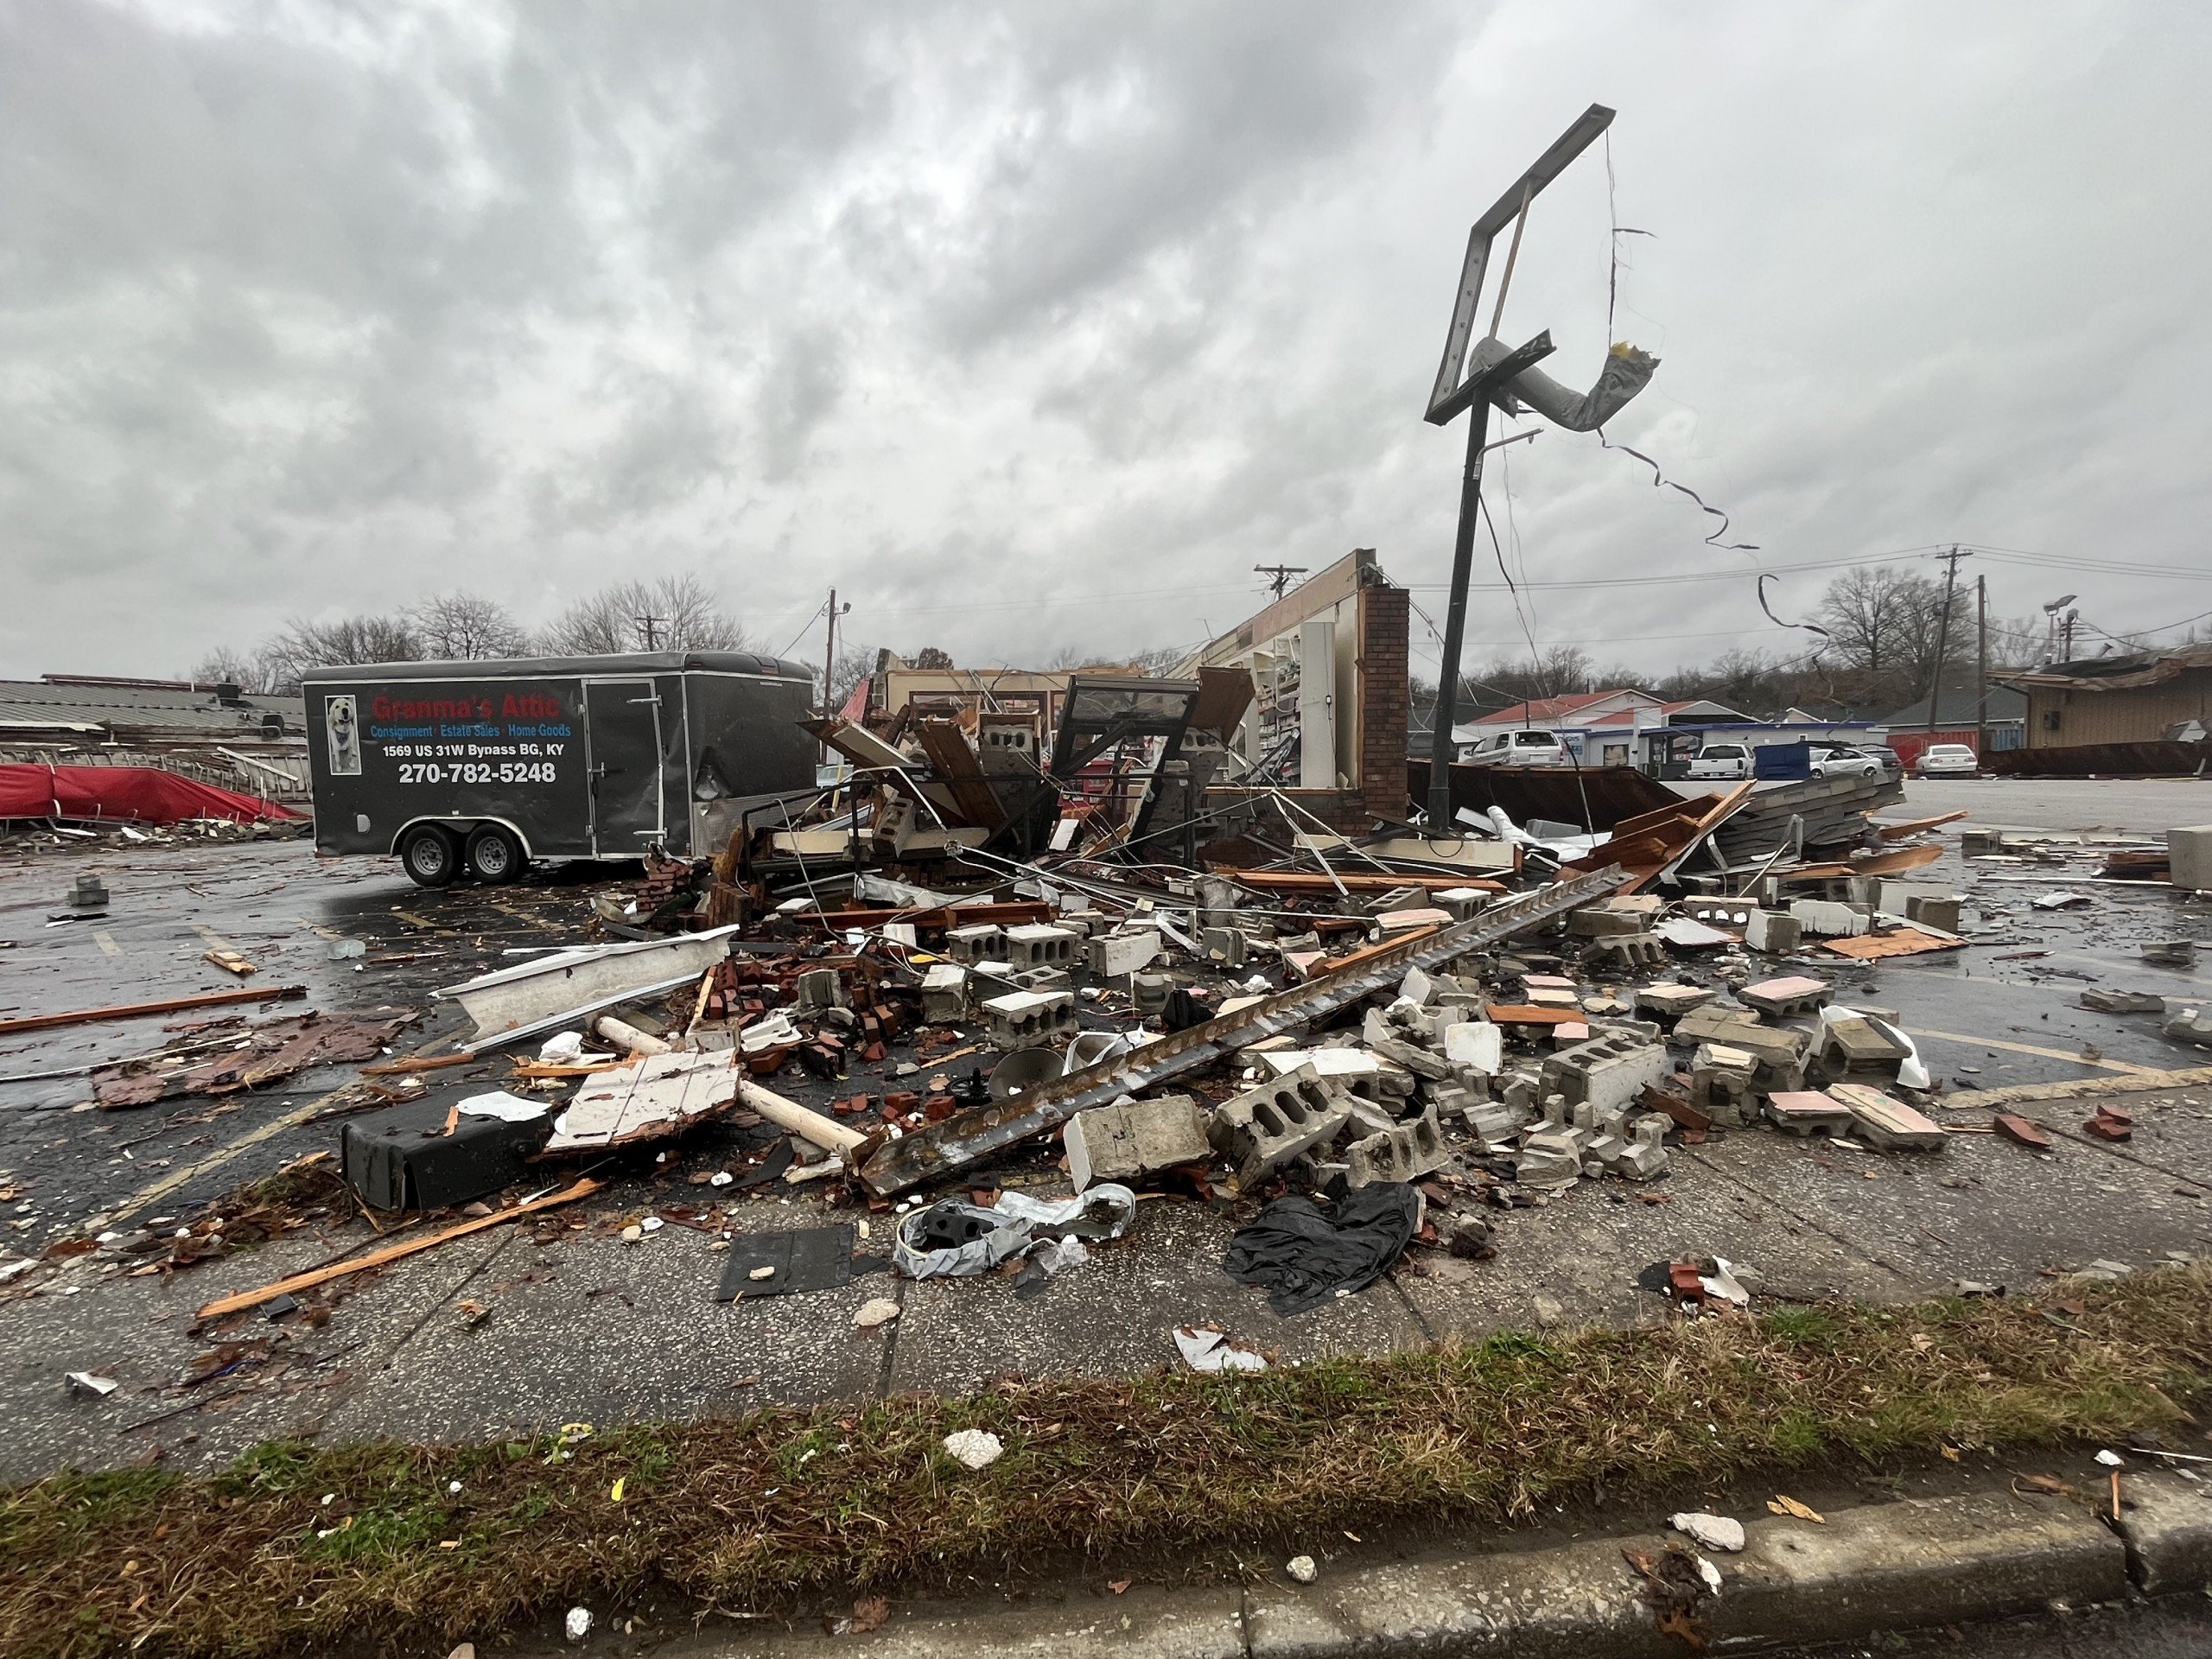 Attorney General Cameron warns of natural disaster scams following tornados, storms in western and central Kentucky – News 40